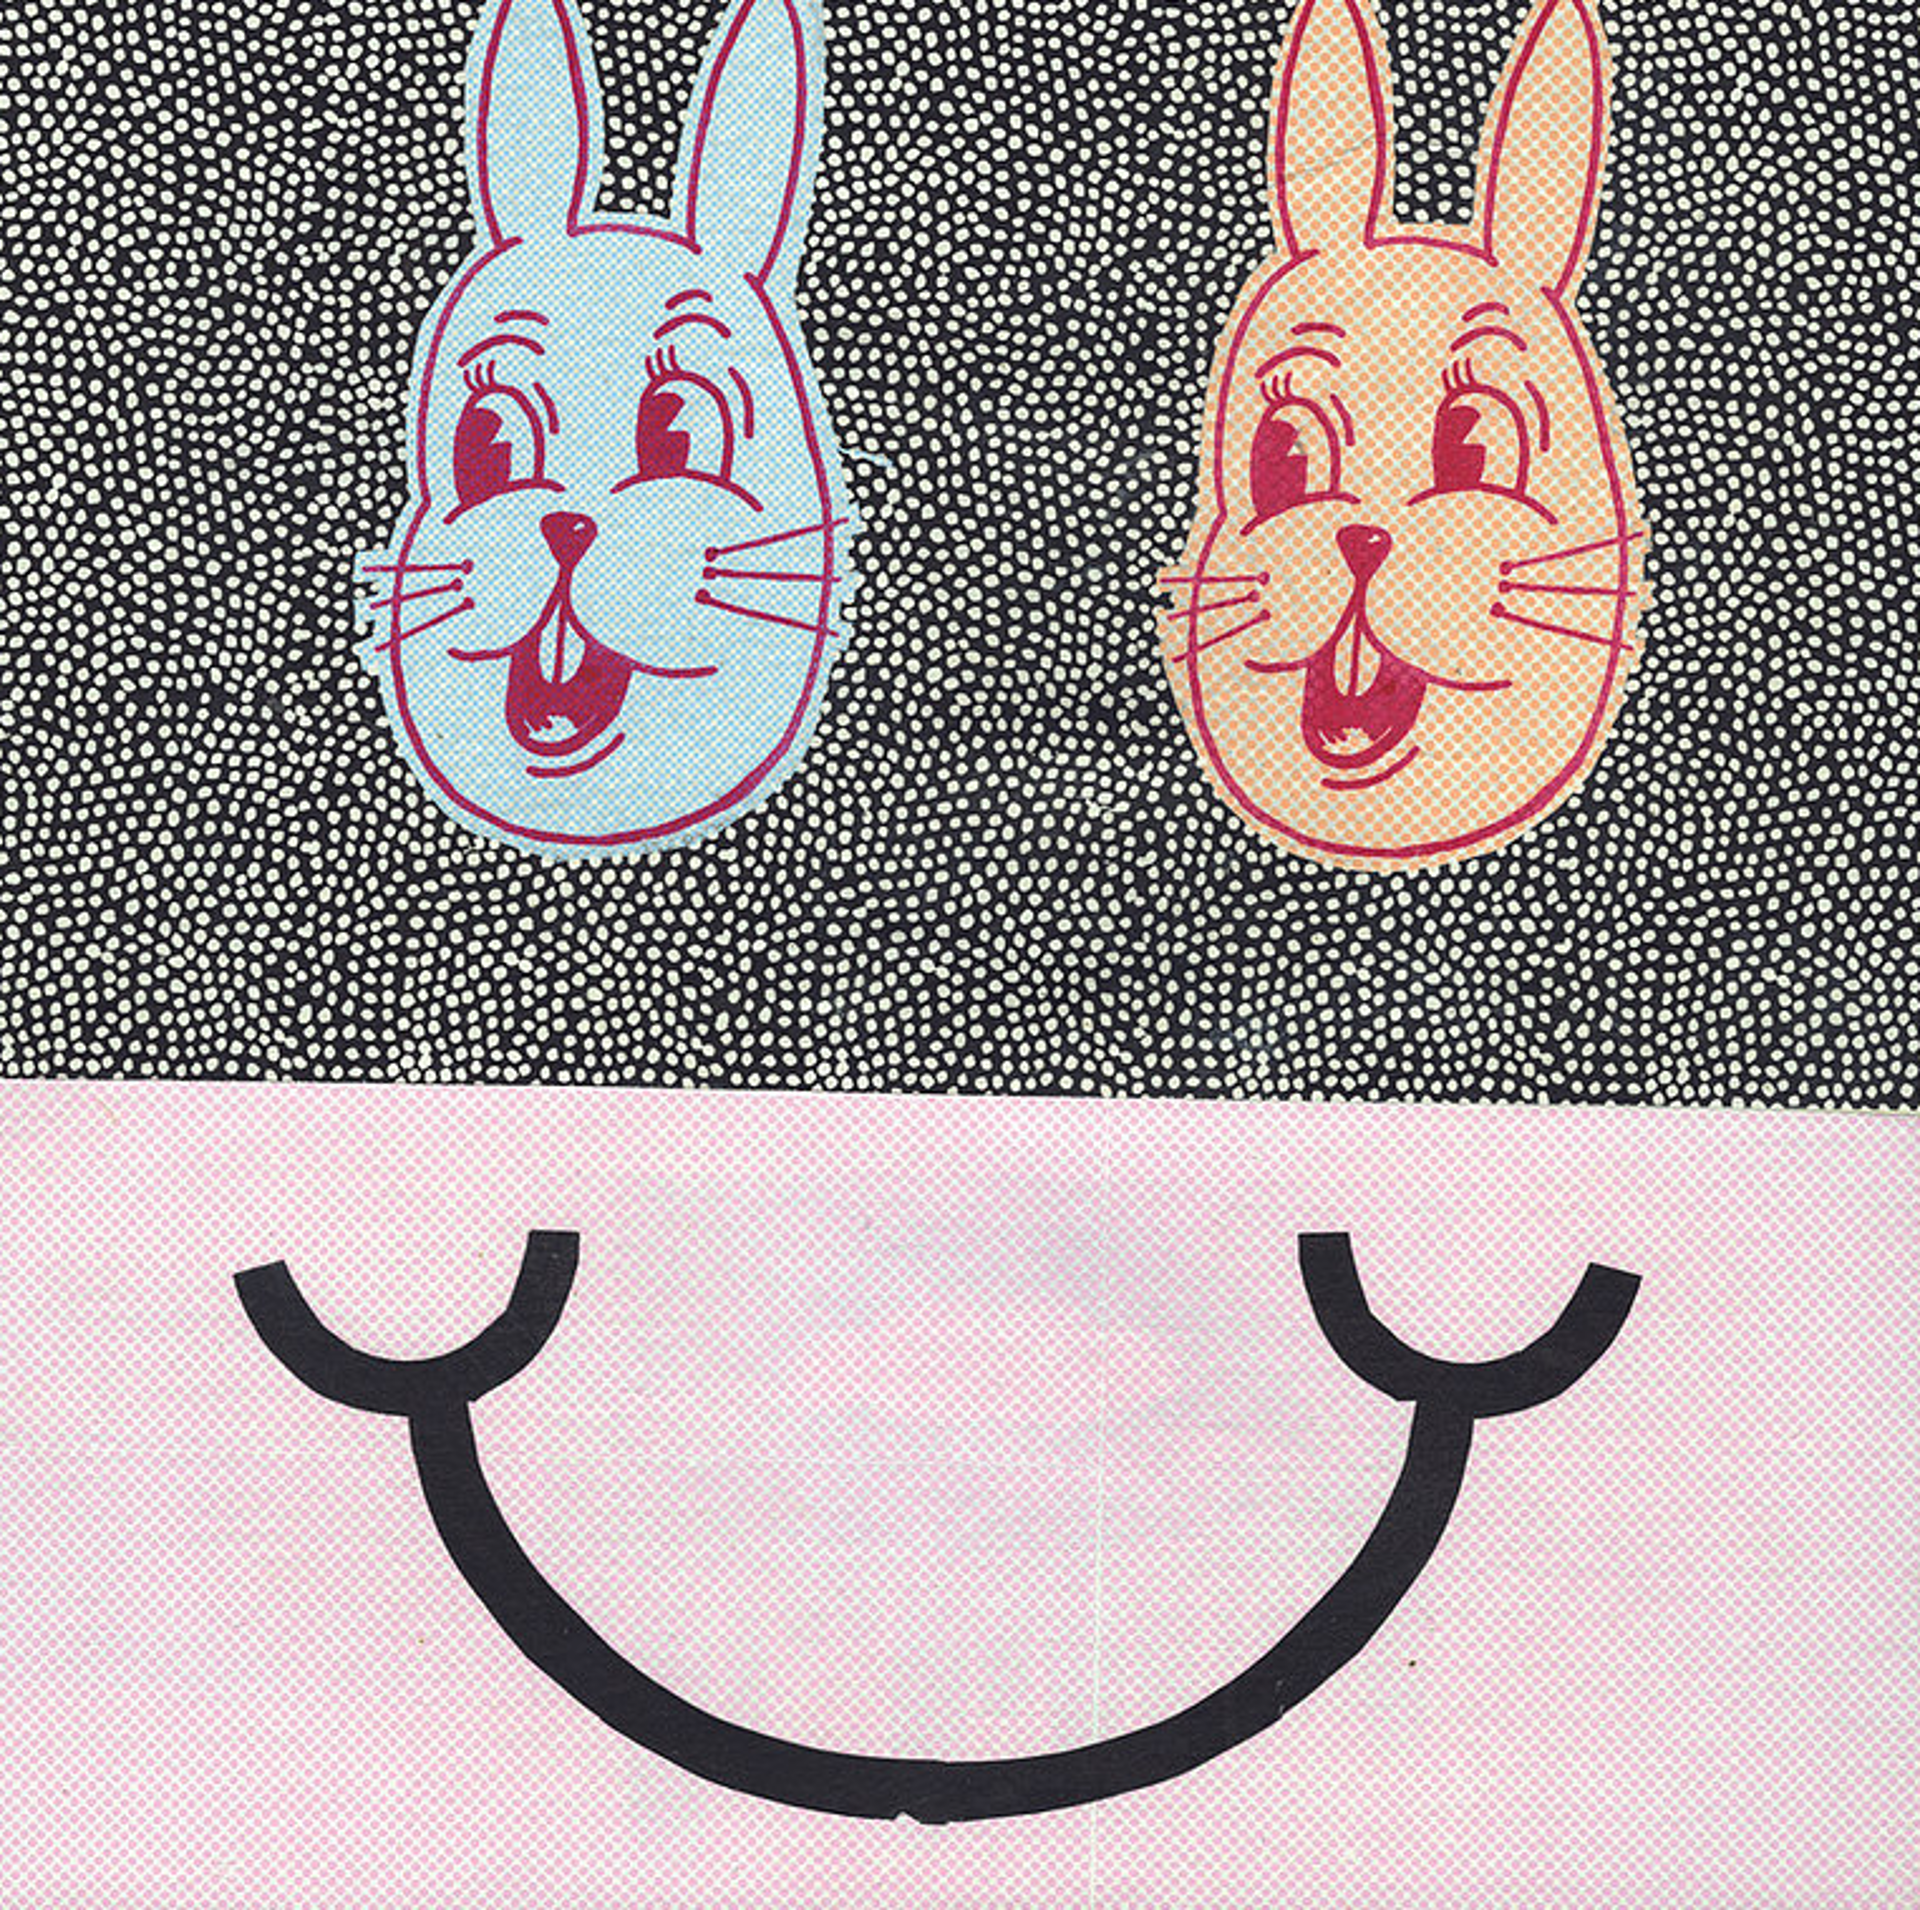 Happy Bunnies by Chadwick Tolley